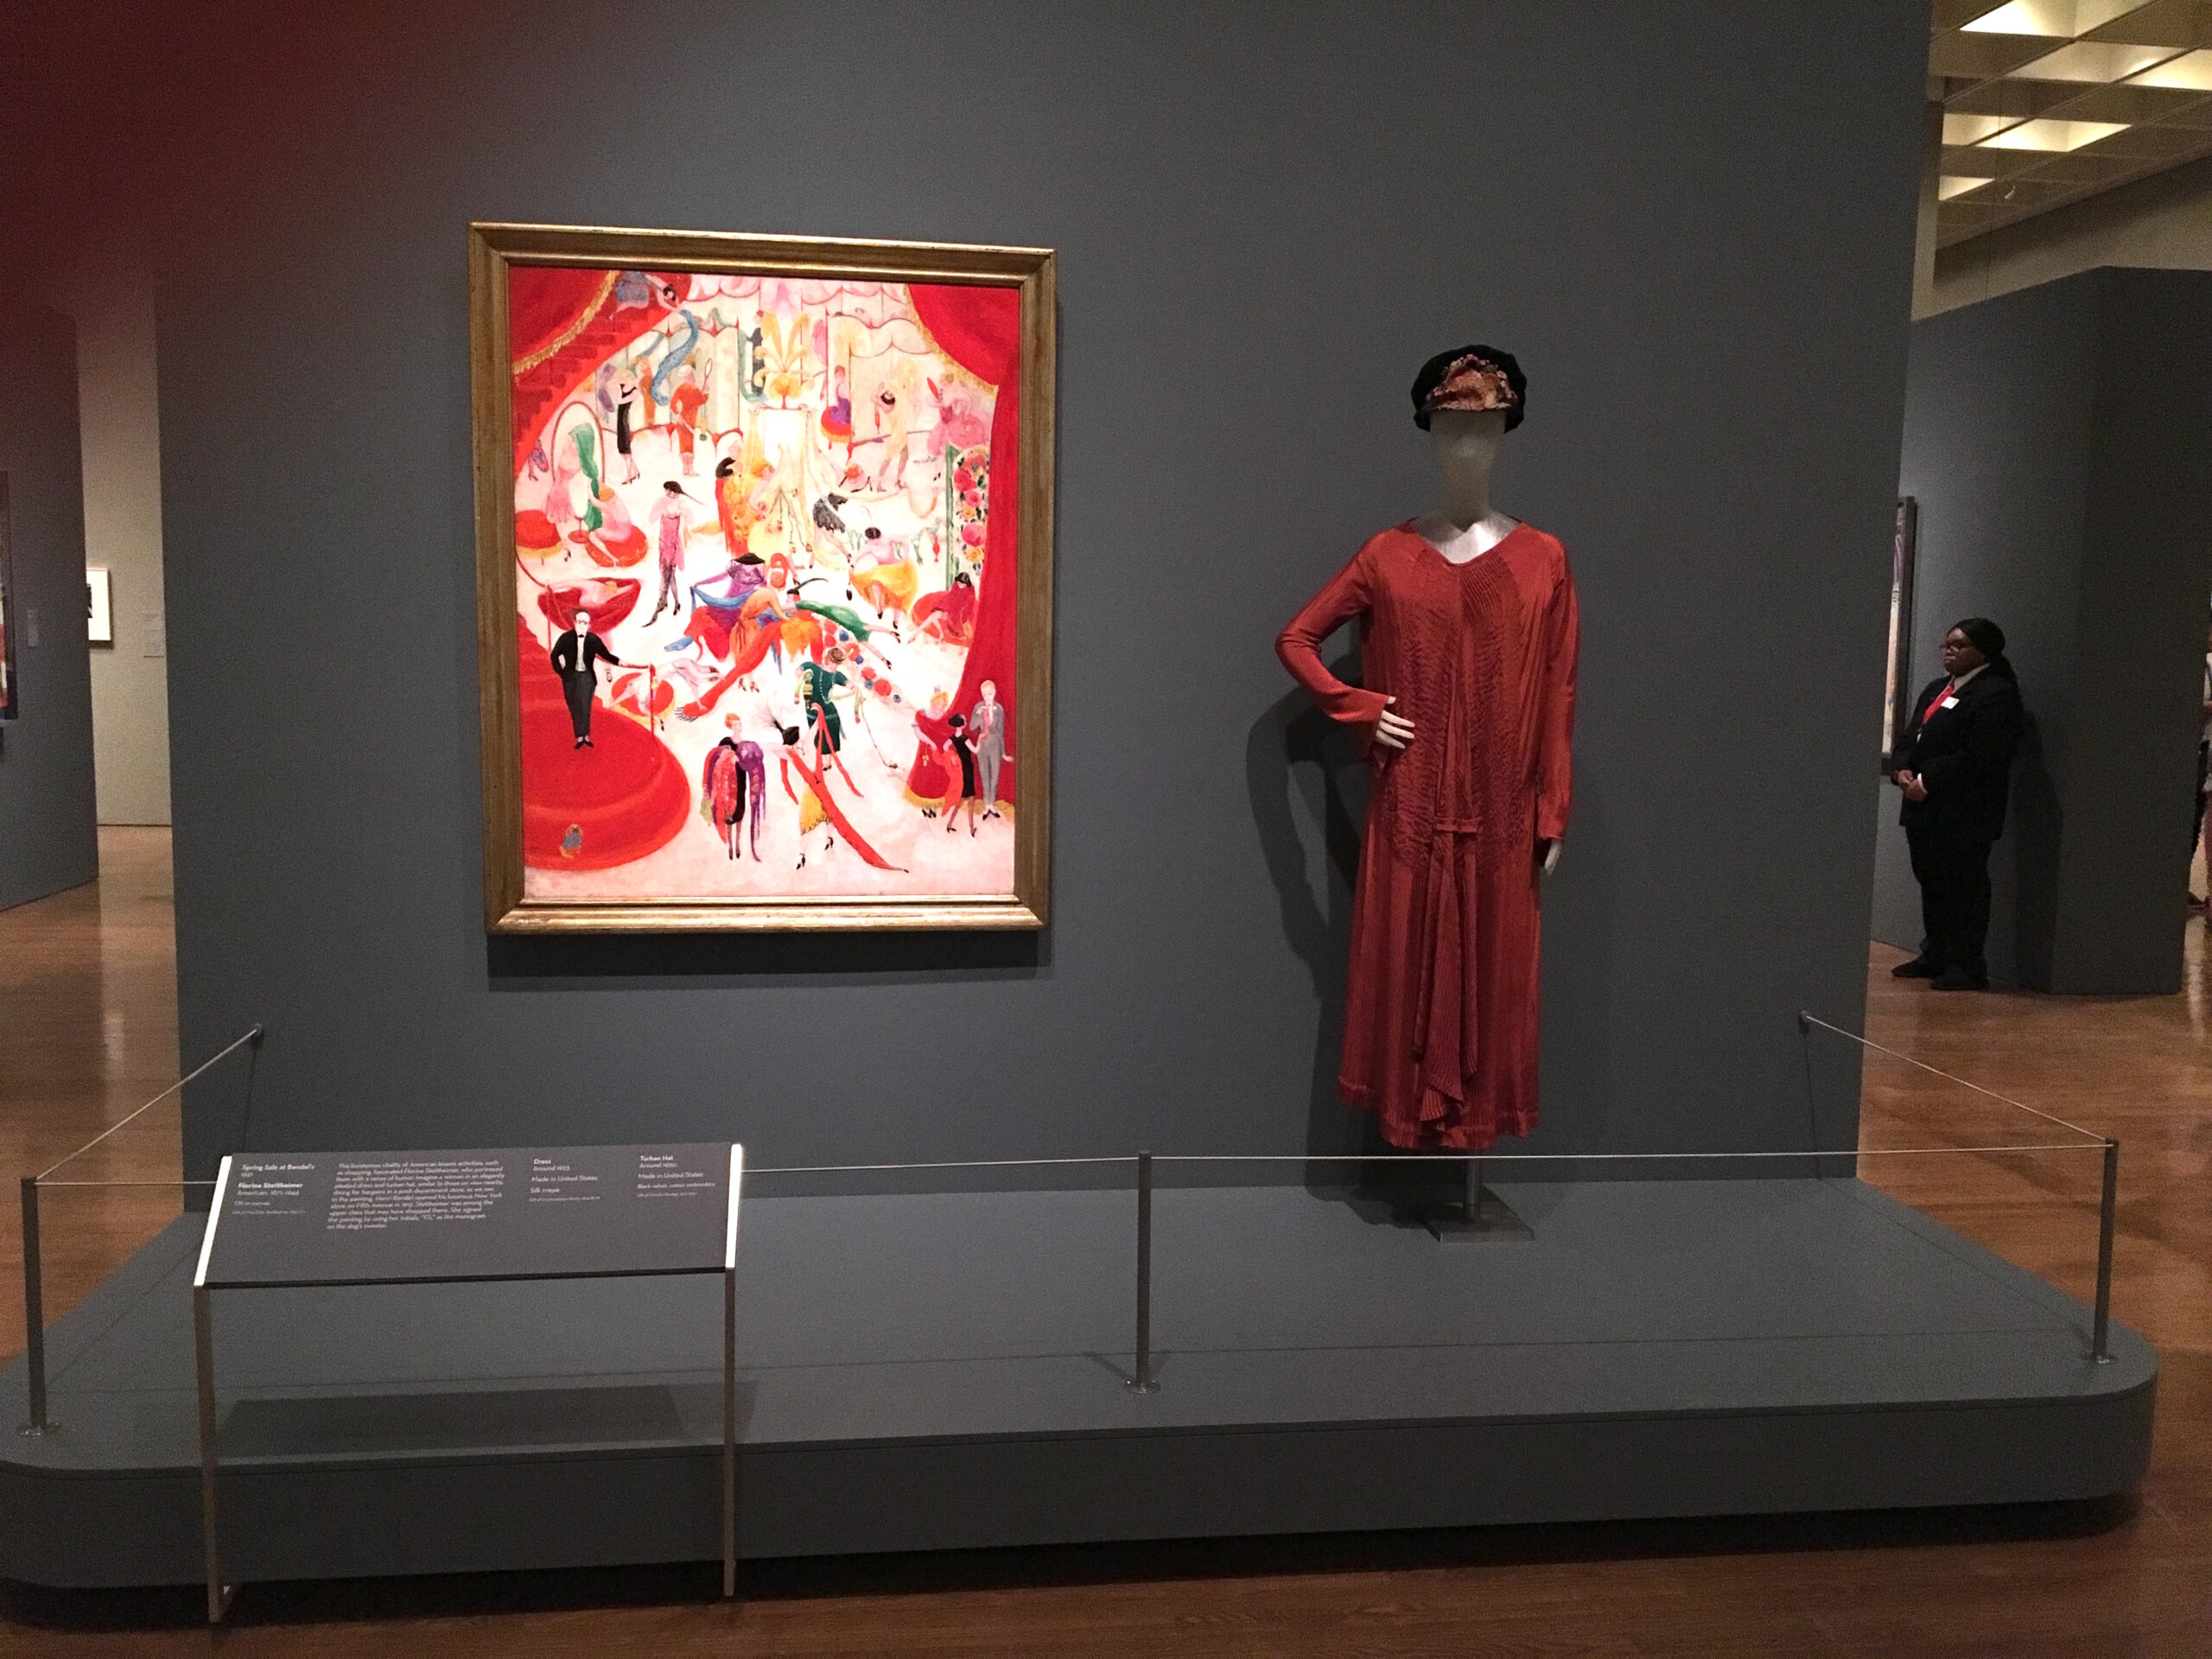 Modern Times Exhibition at the Philadelphia Museum of Art